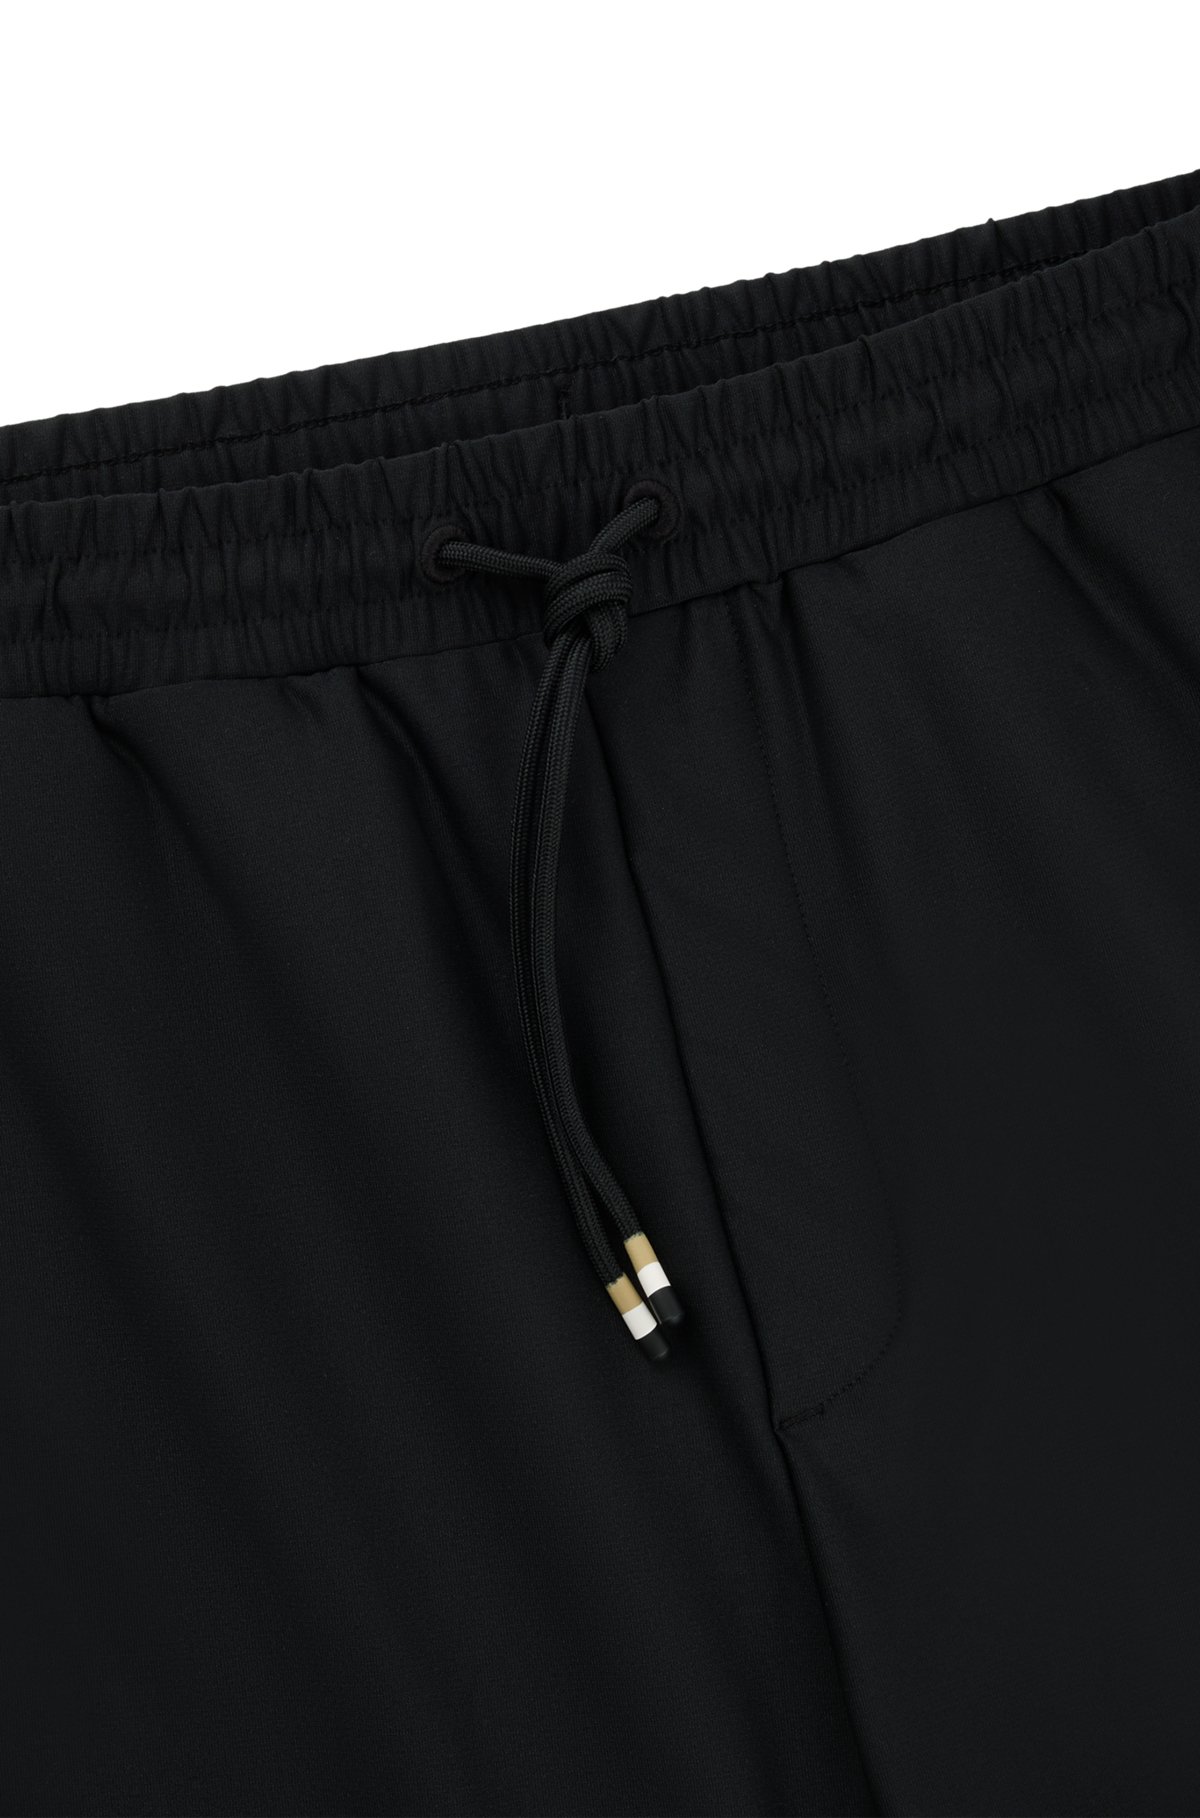 BOSS x Matteo Berrettini tracksuit bottoms with contrast tape and branding, Black